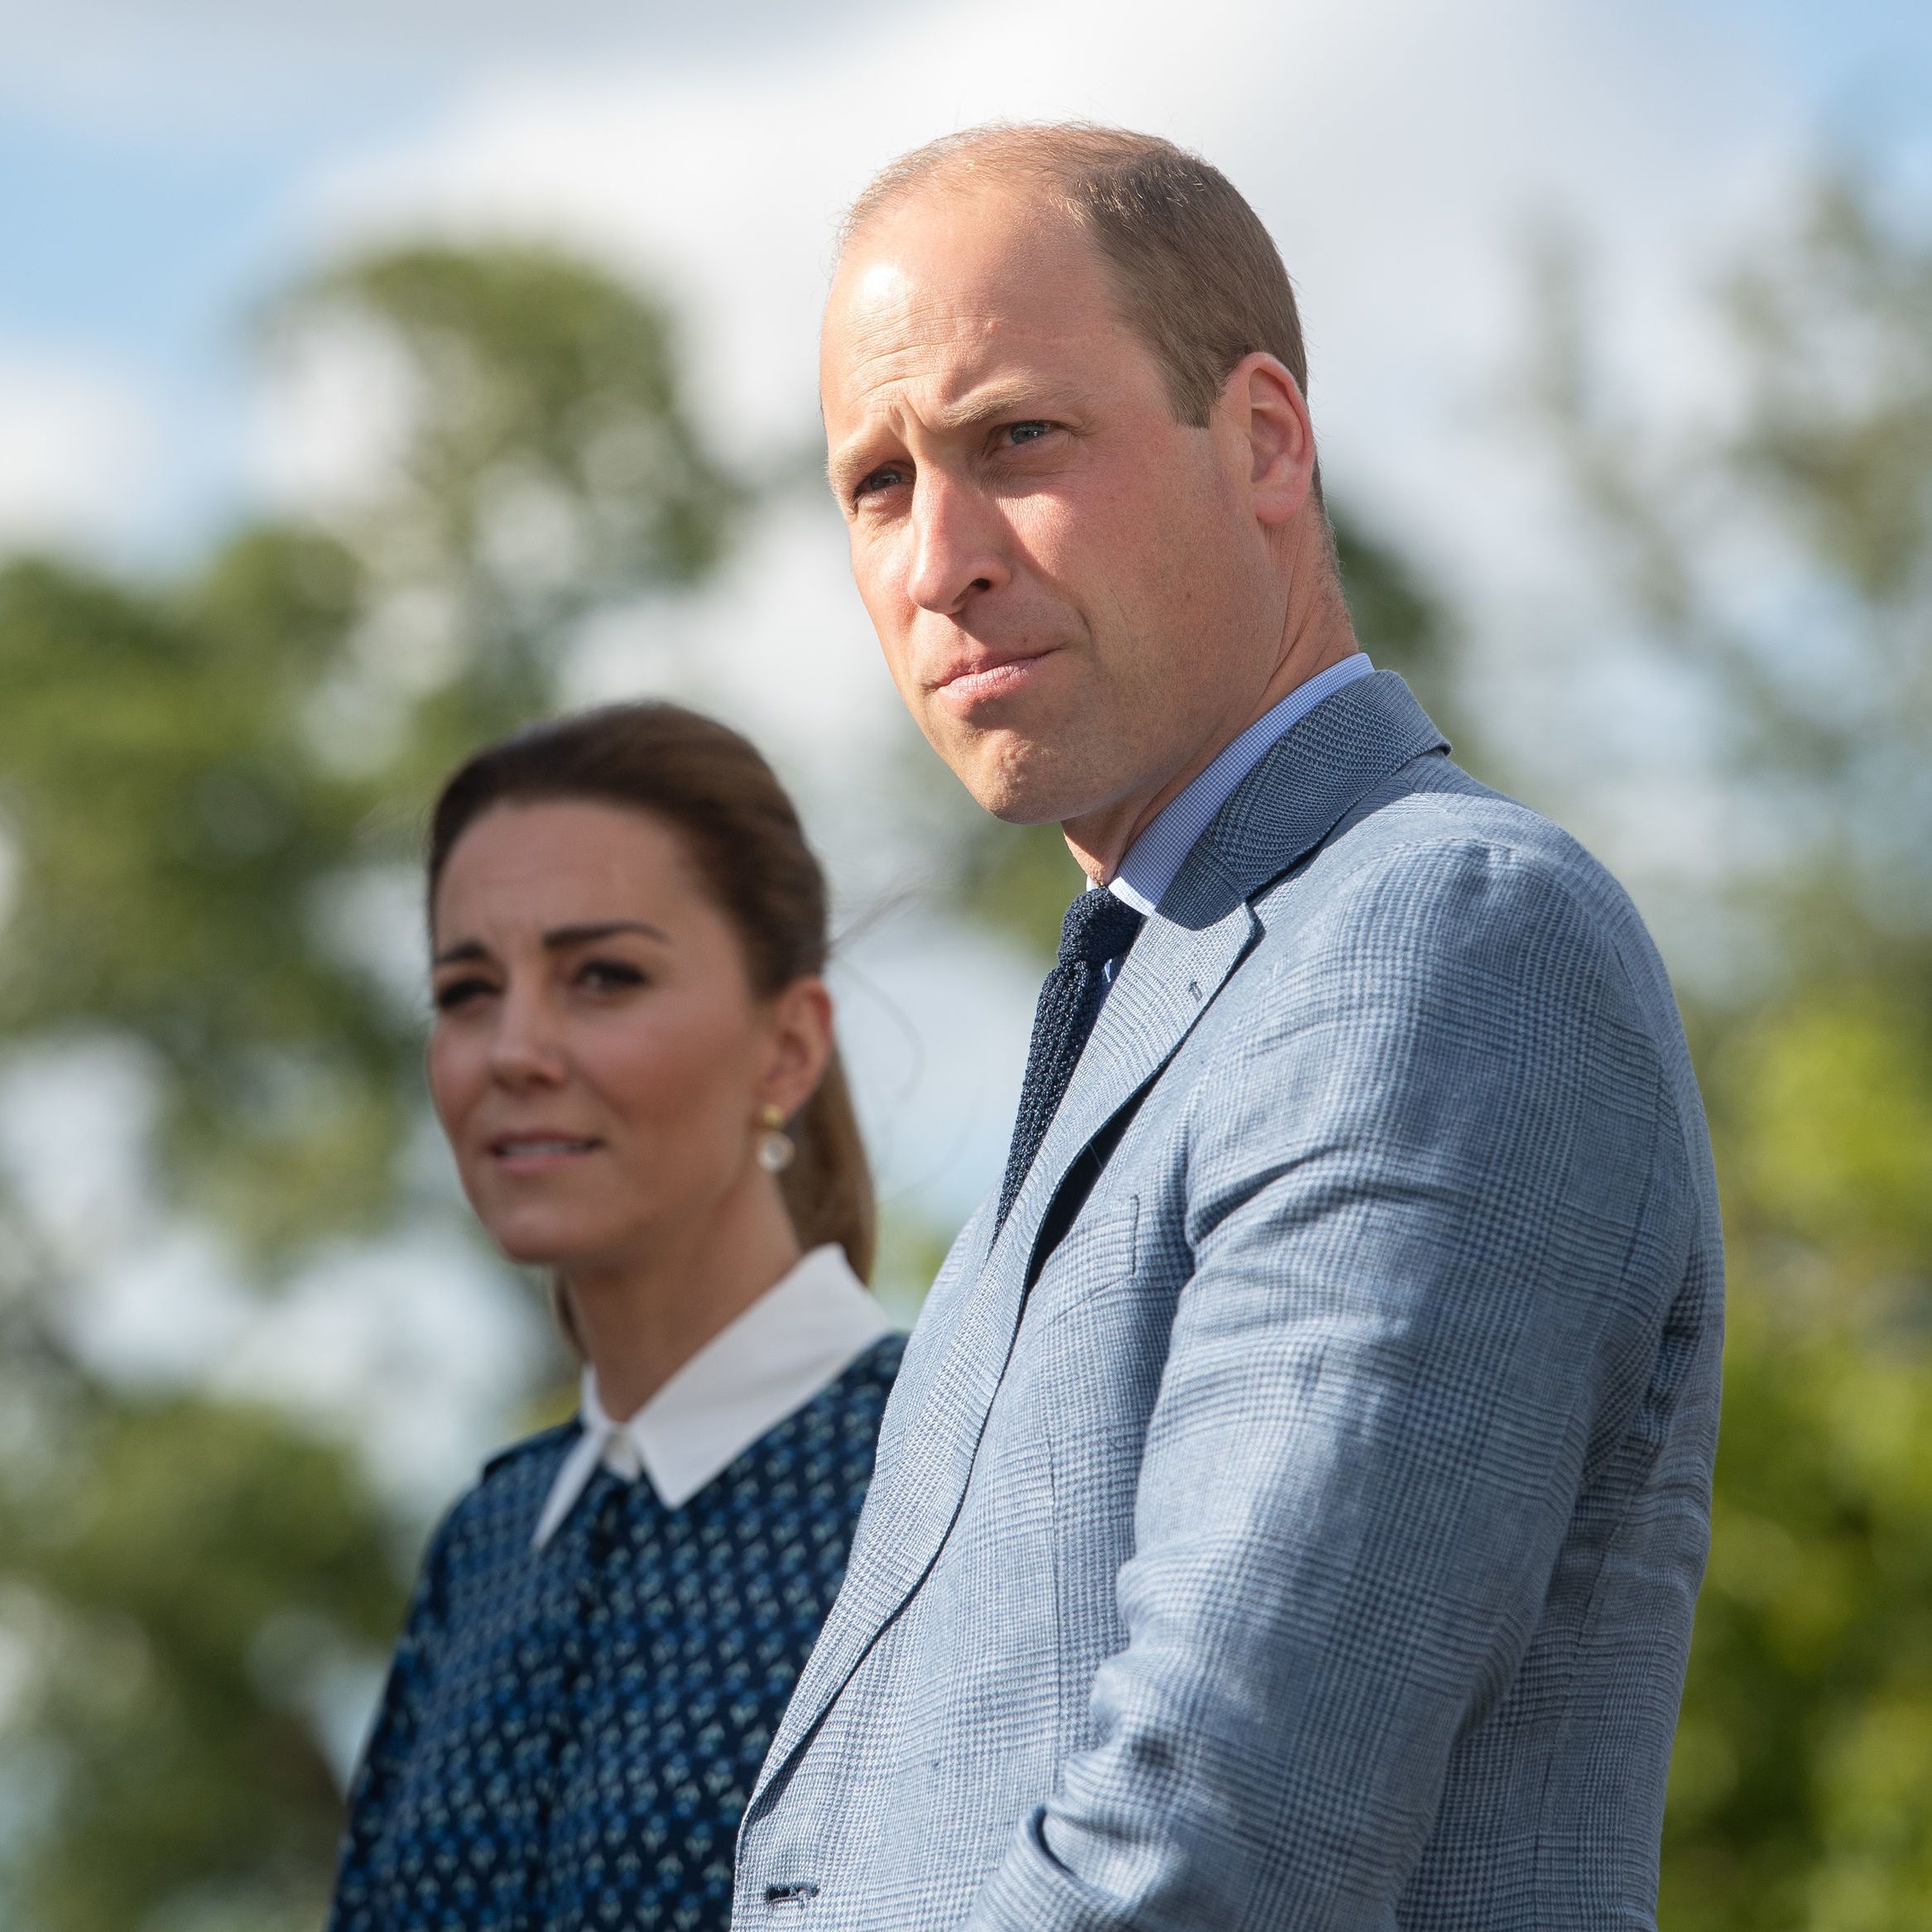 Prince Harry Claims Prince William and Kate Middleton Told Him to Wear Nazi Costume